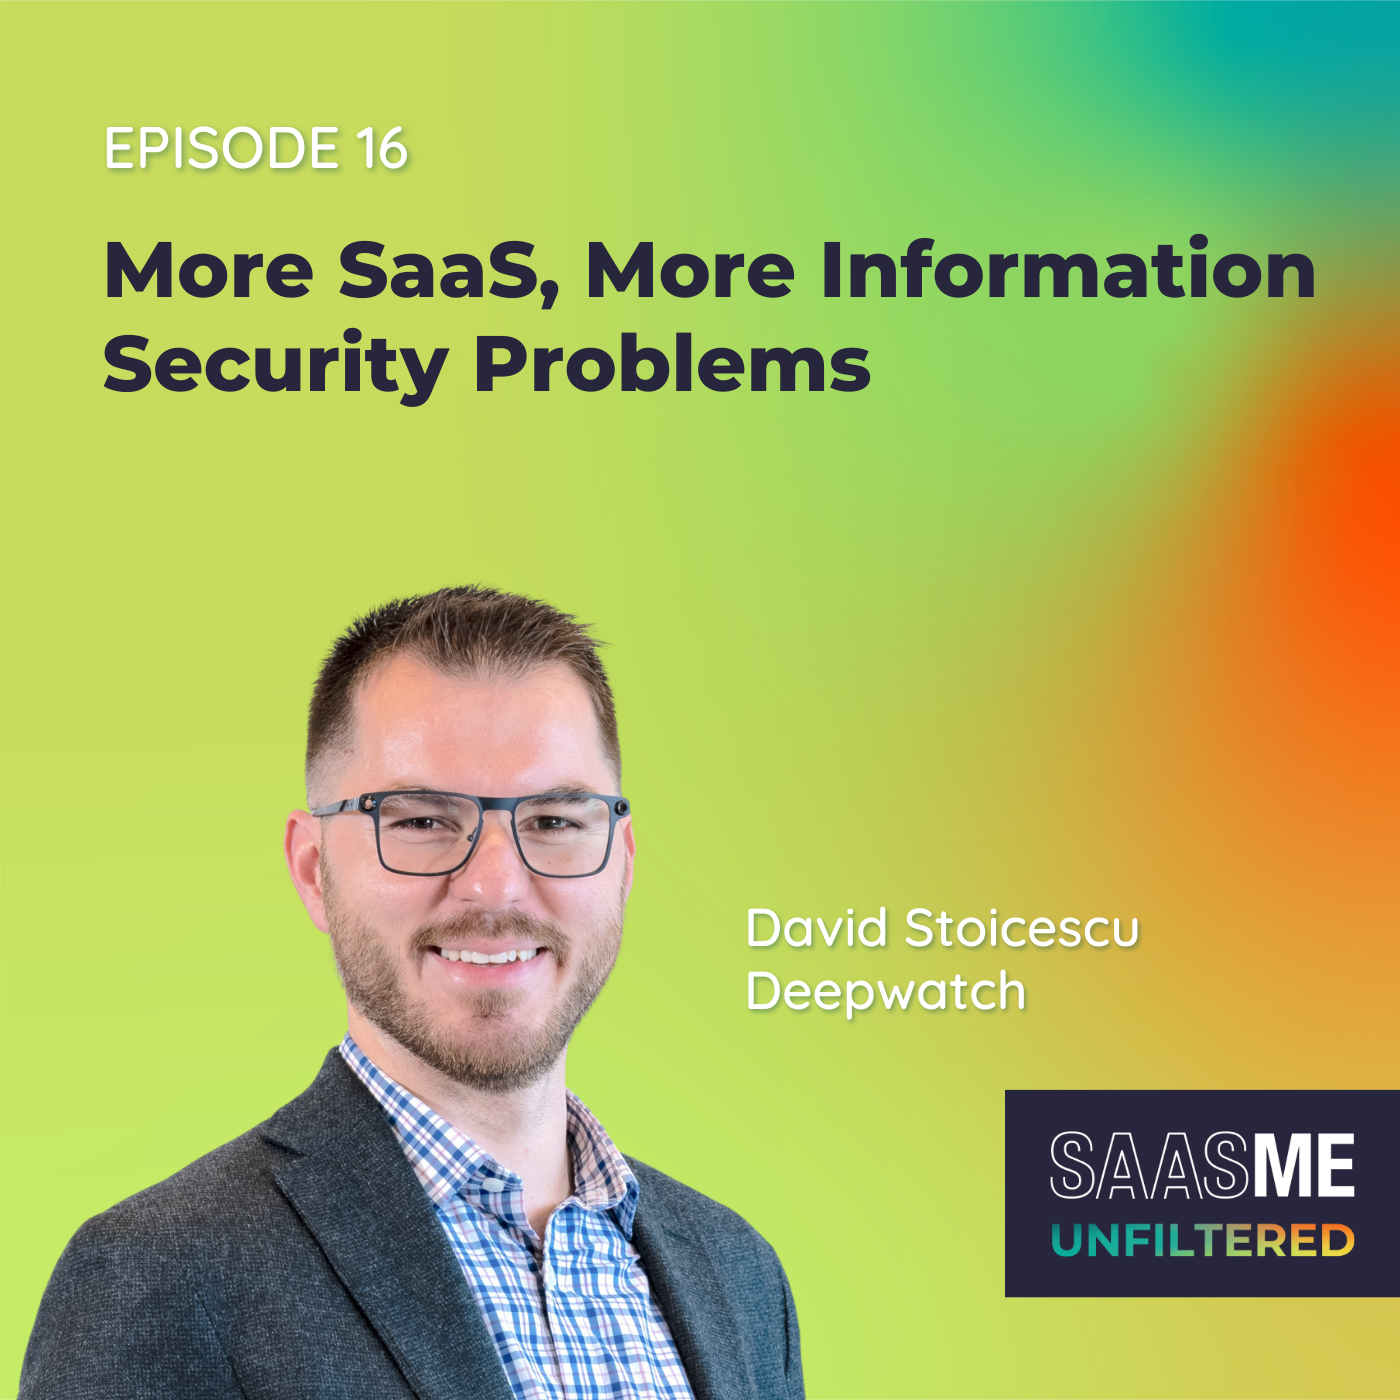 David Stoicescu (Part 1): More SaaS, More Information Security Problems